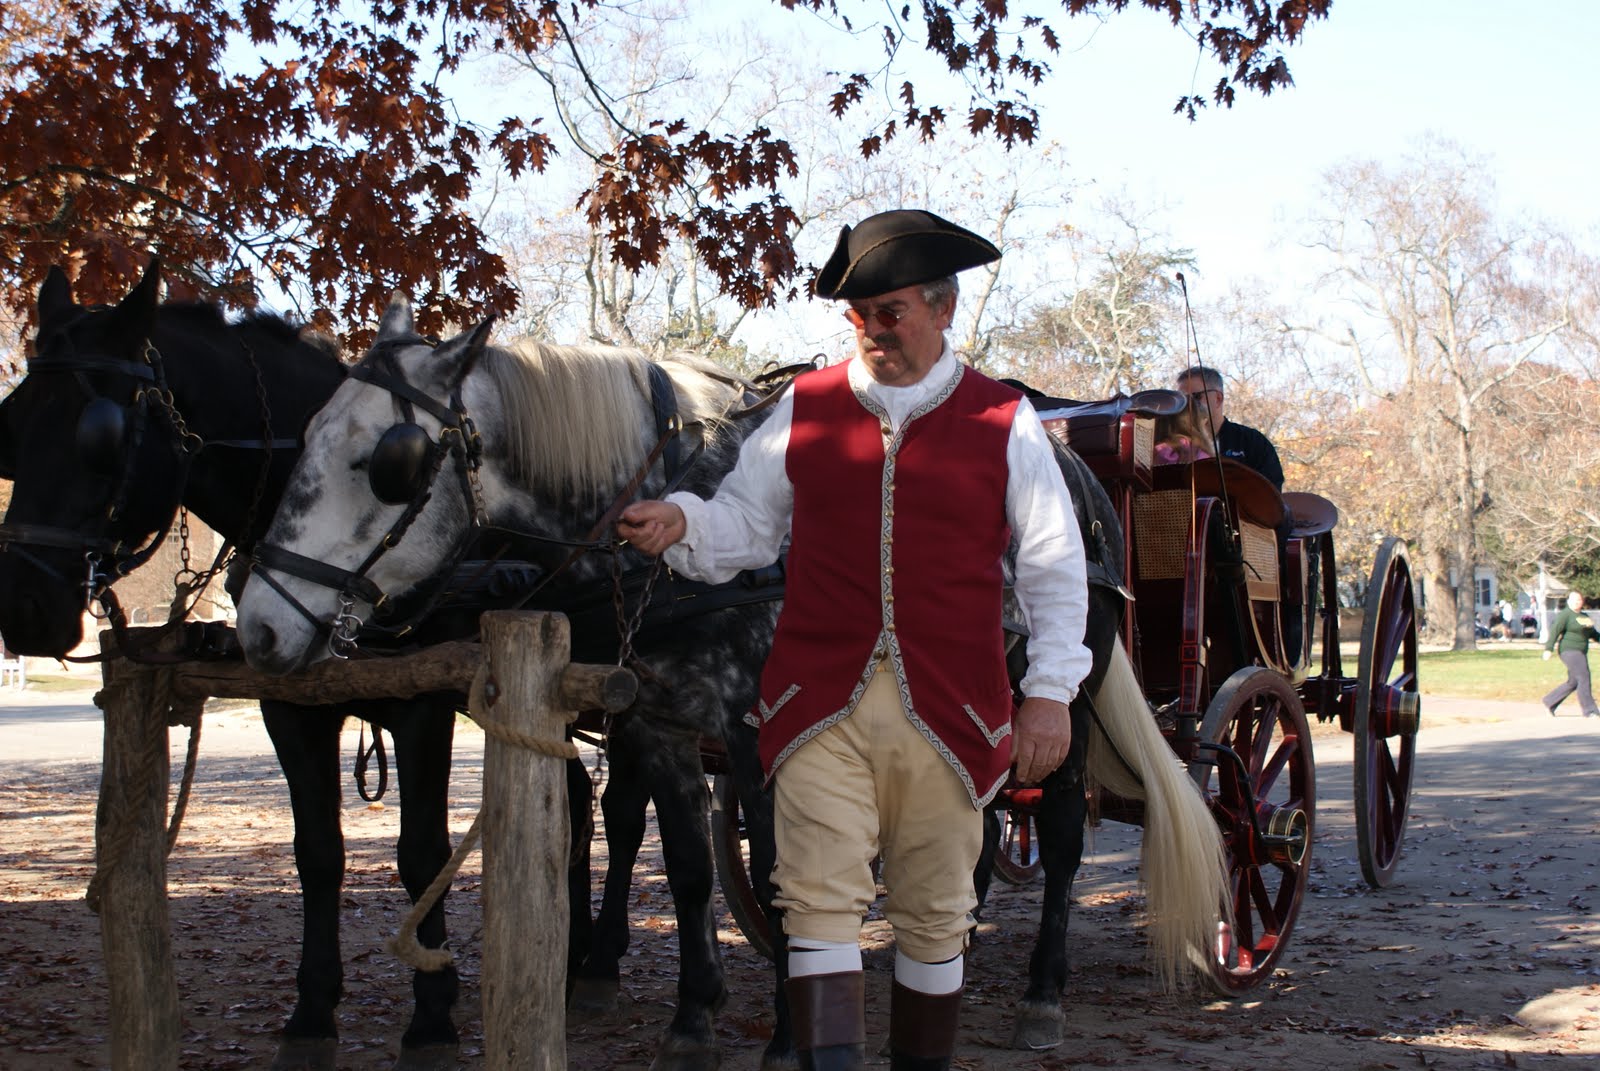 12 Kids And Counting?: Fall In Colonial Williamsburg, Virginia